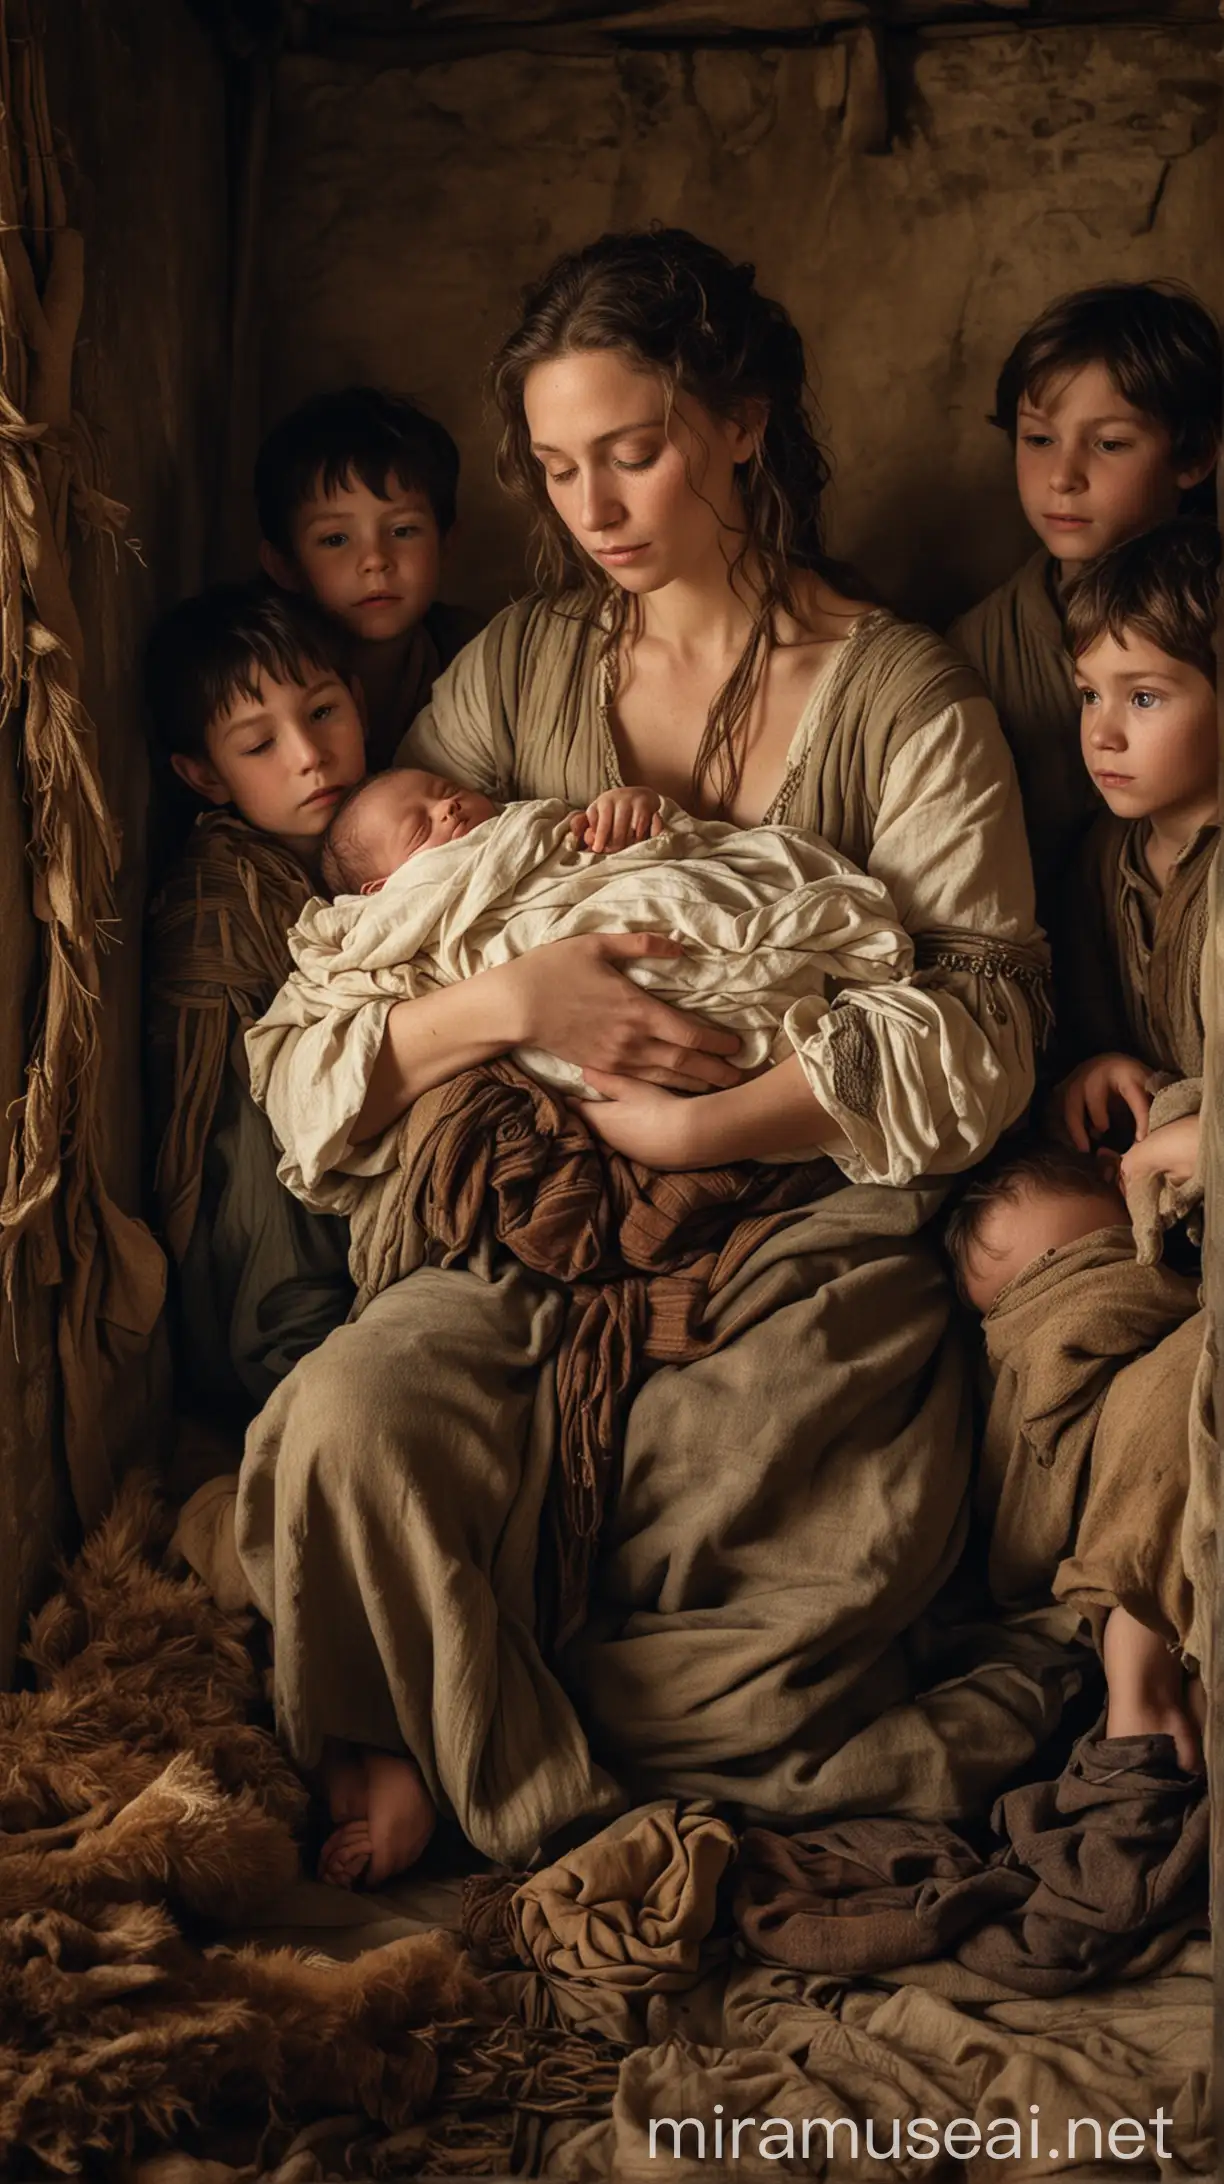 Leah Cradling Newborn Daughter Dinah Surrounded by Sons in Ancient 17thCentury BC Dwelling